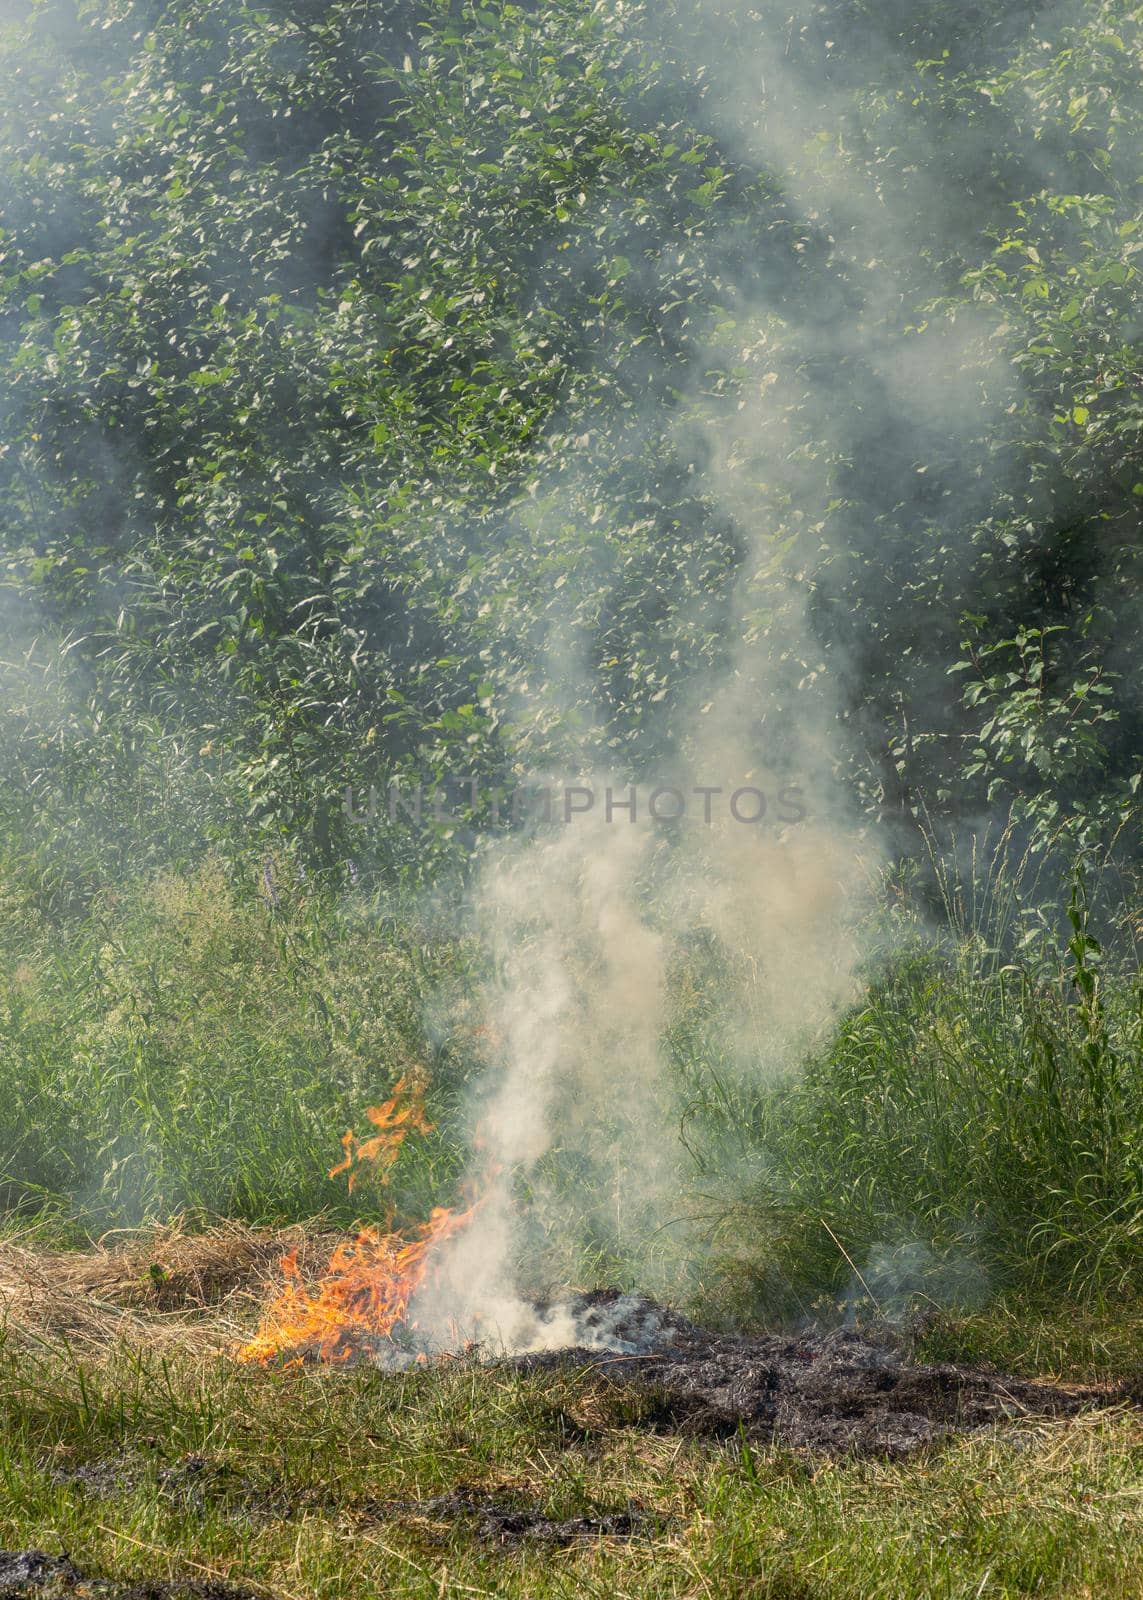 Fire on old green grass, burning the cost, dangerous for nature